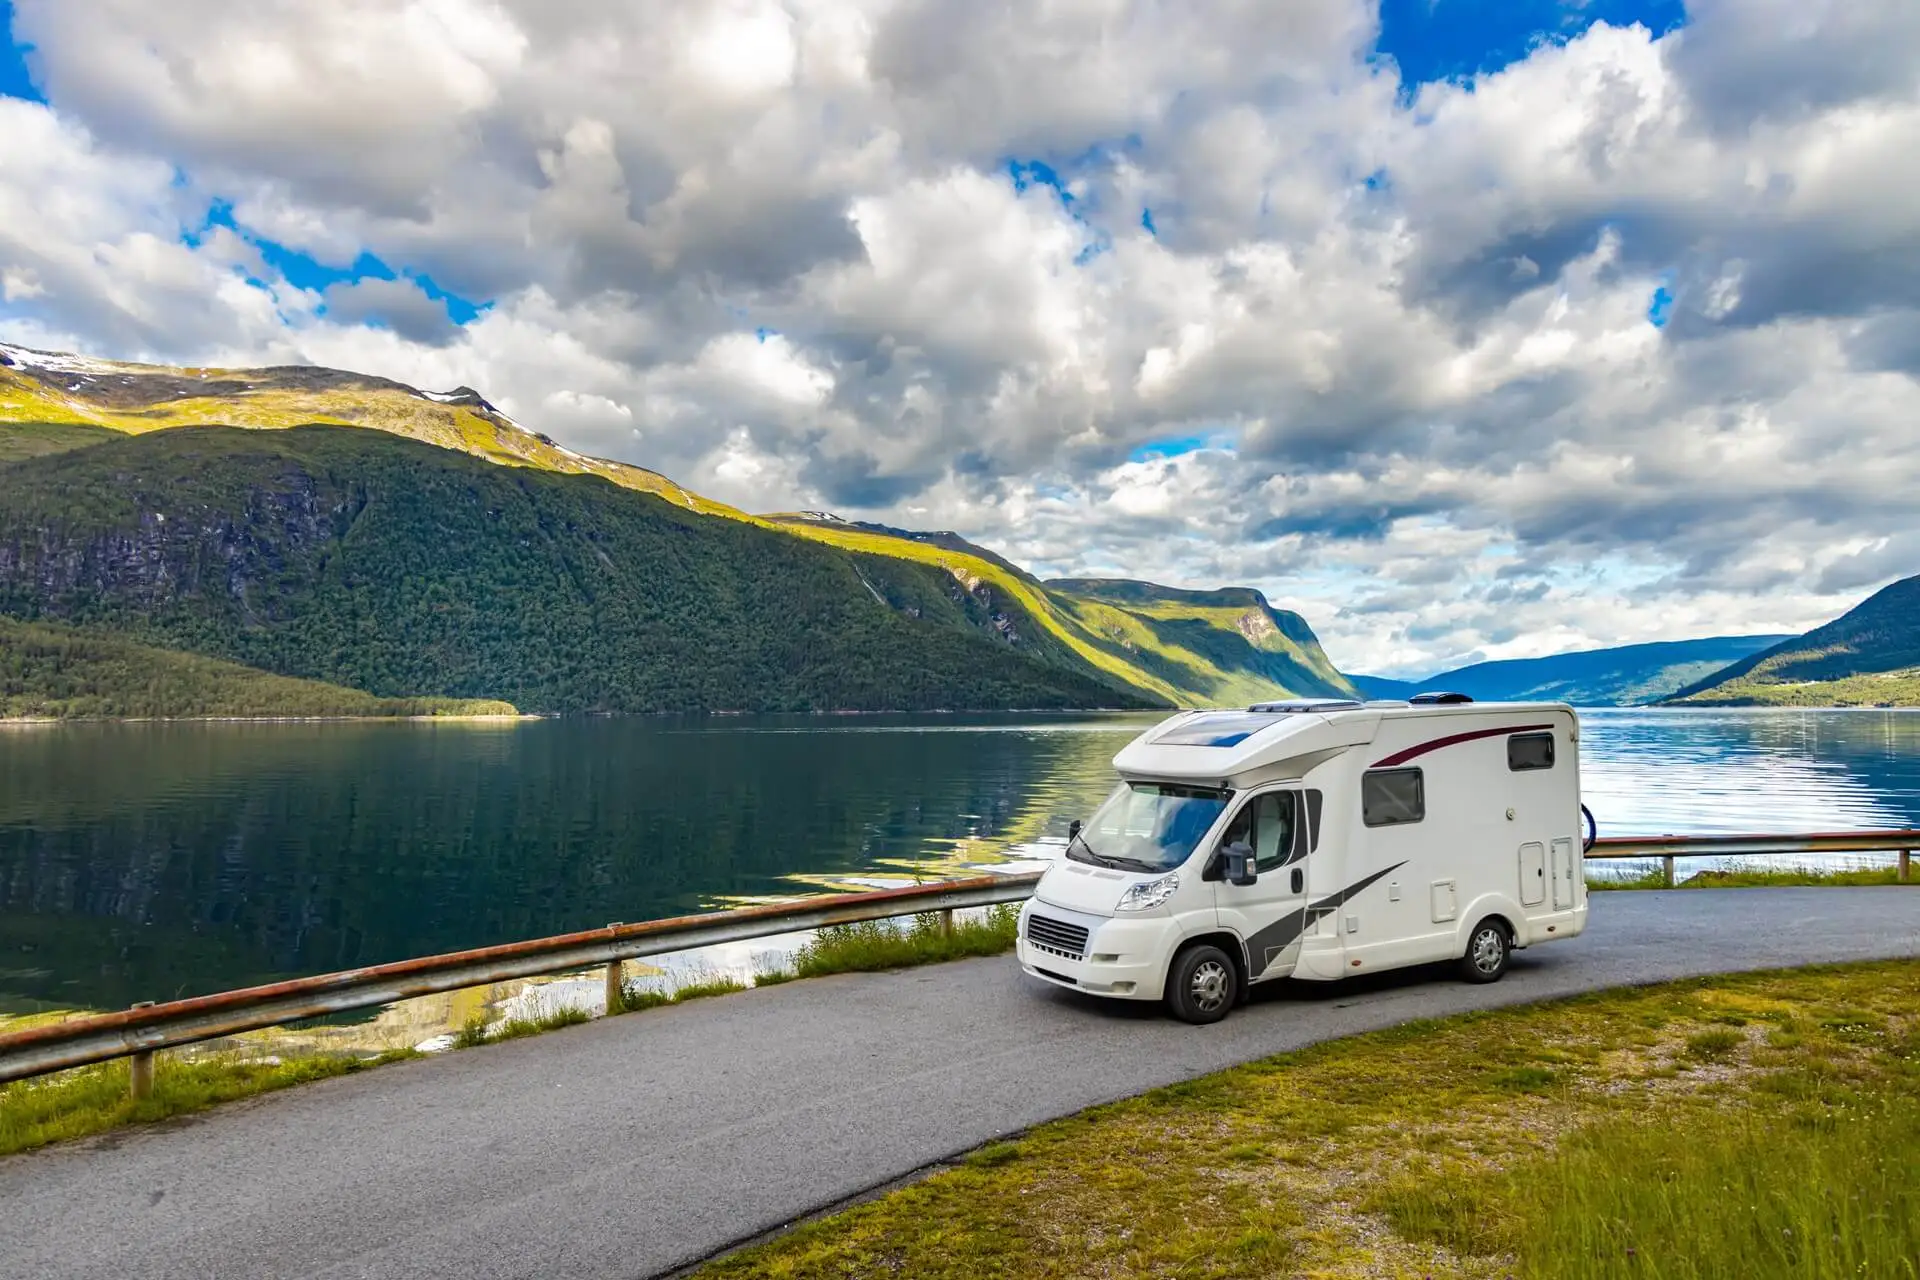 Relevant Checklist for Qualifying for an RV Loan